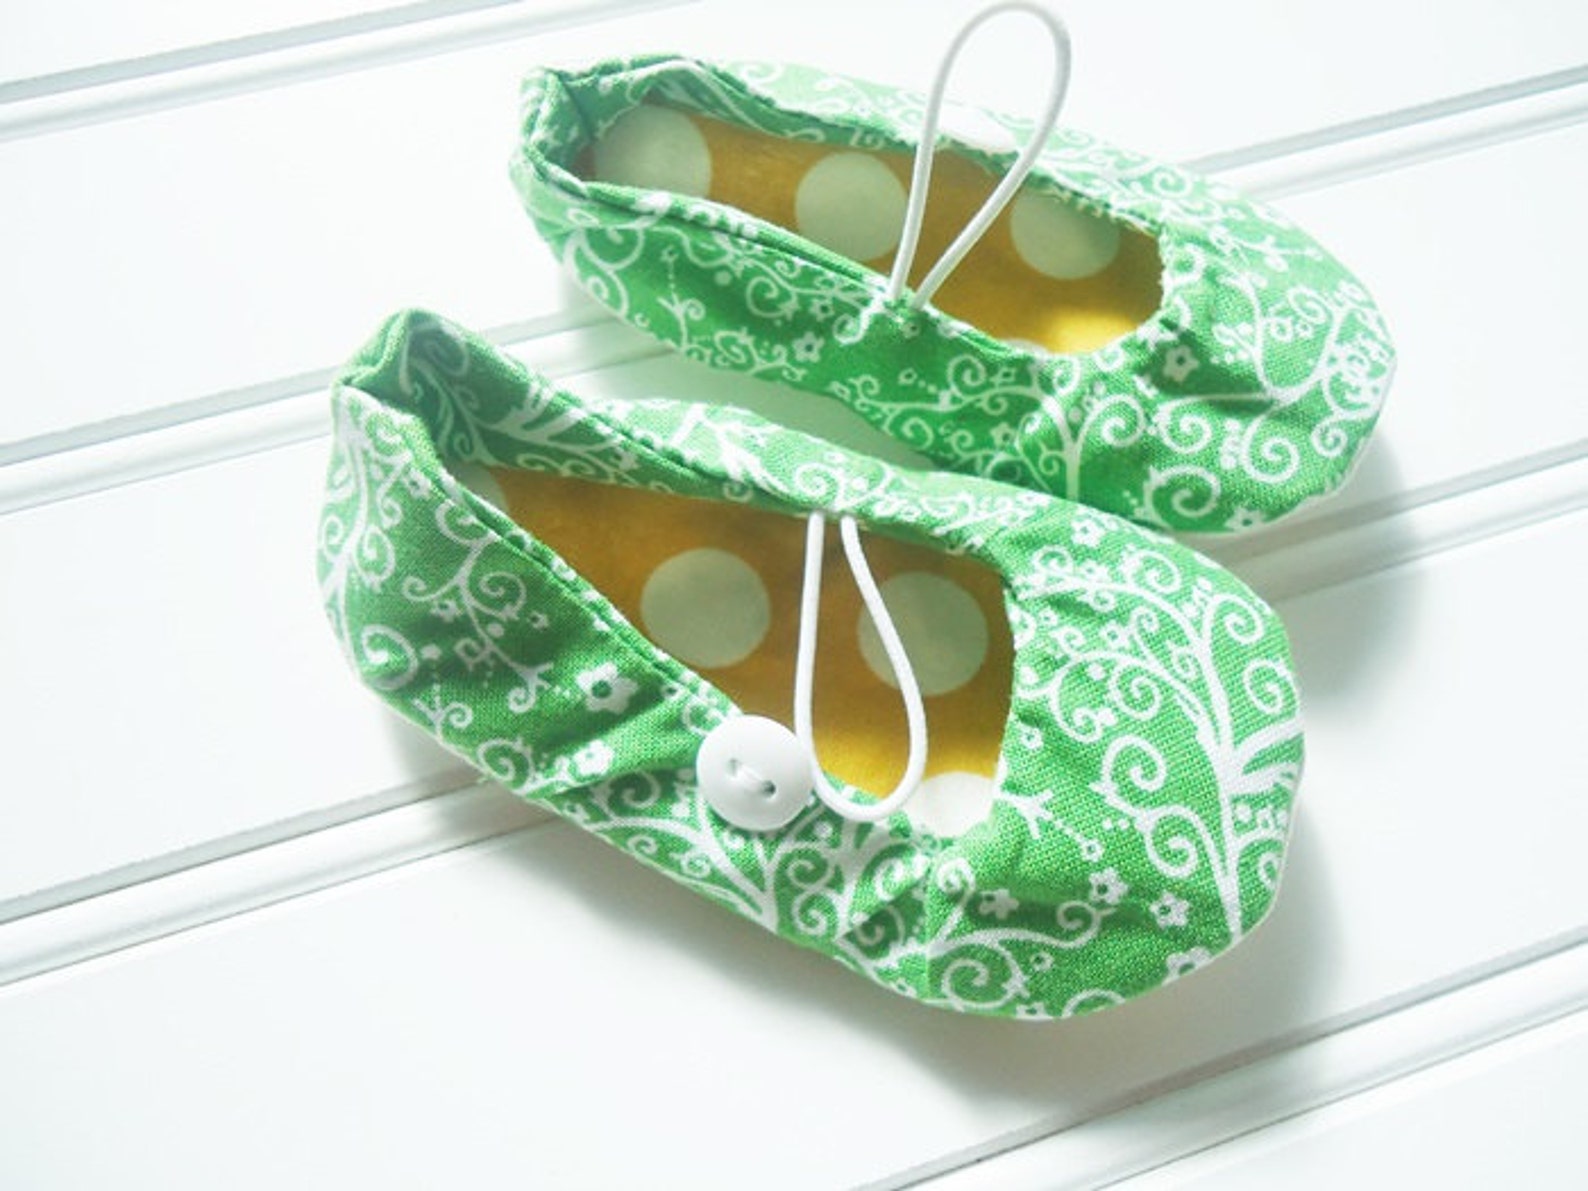 ballet flat slippers - green with white floral {size 3 months}